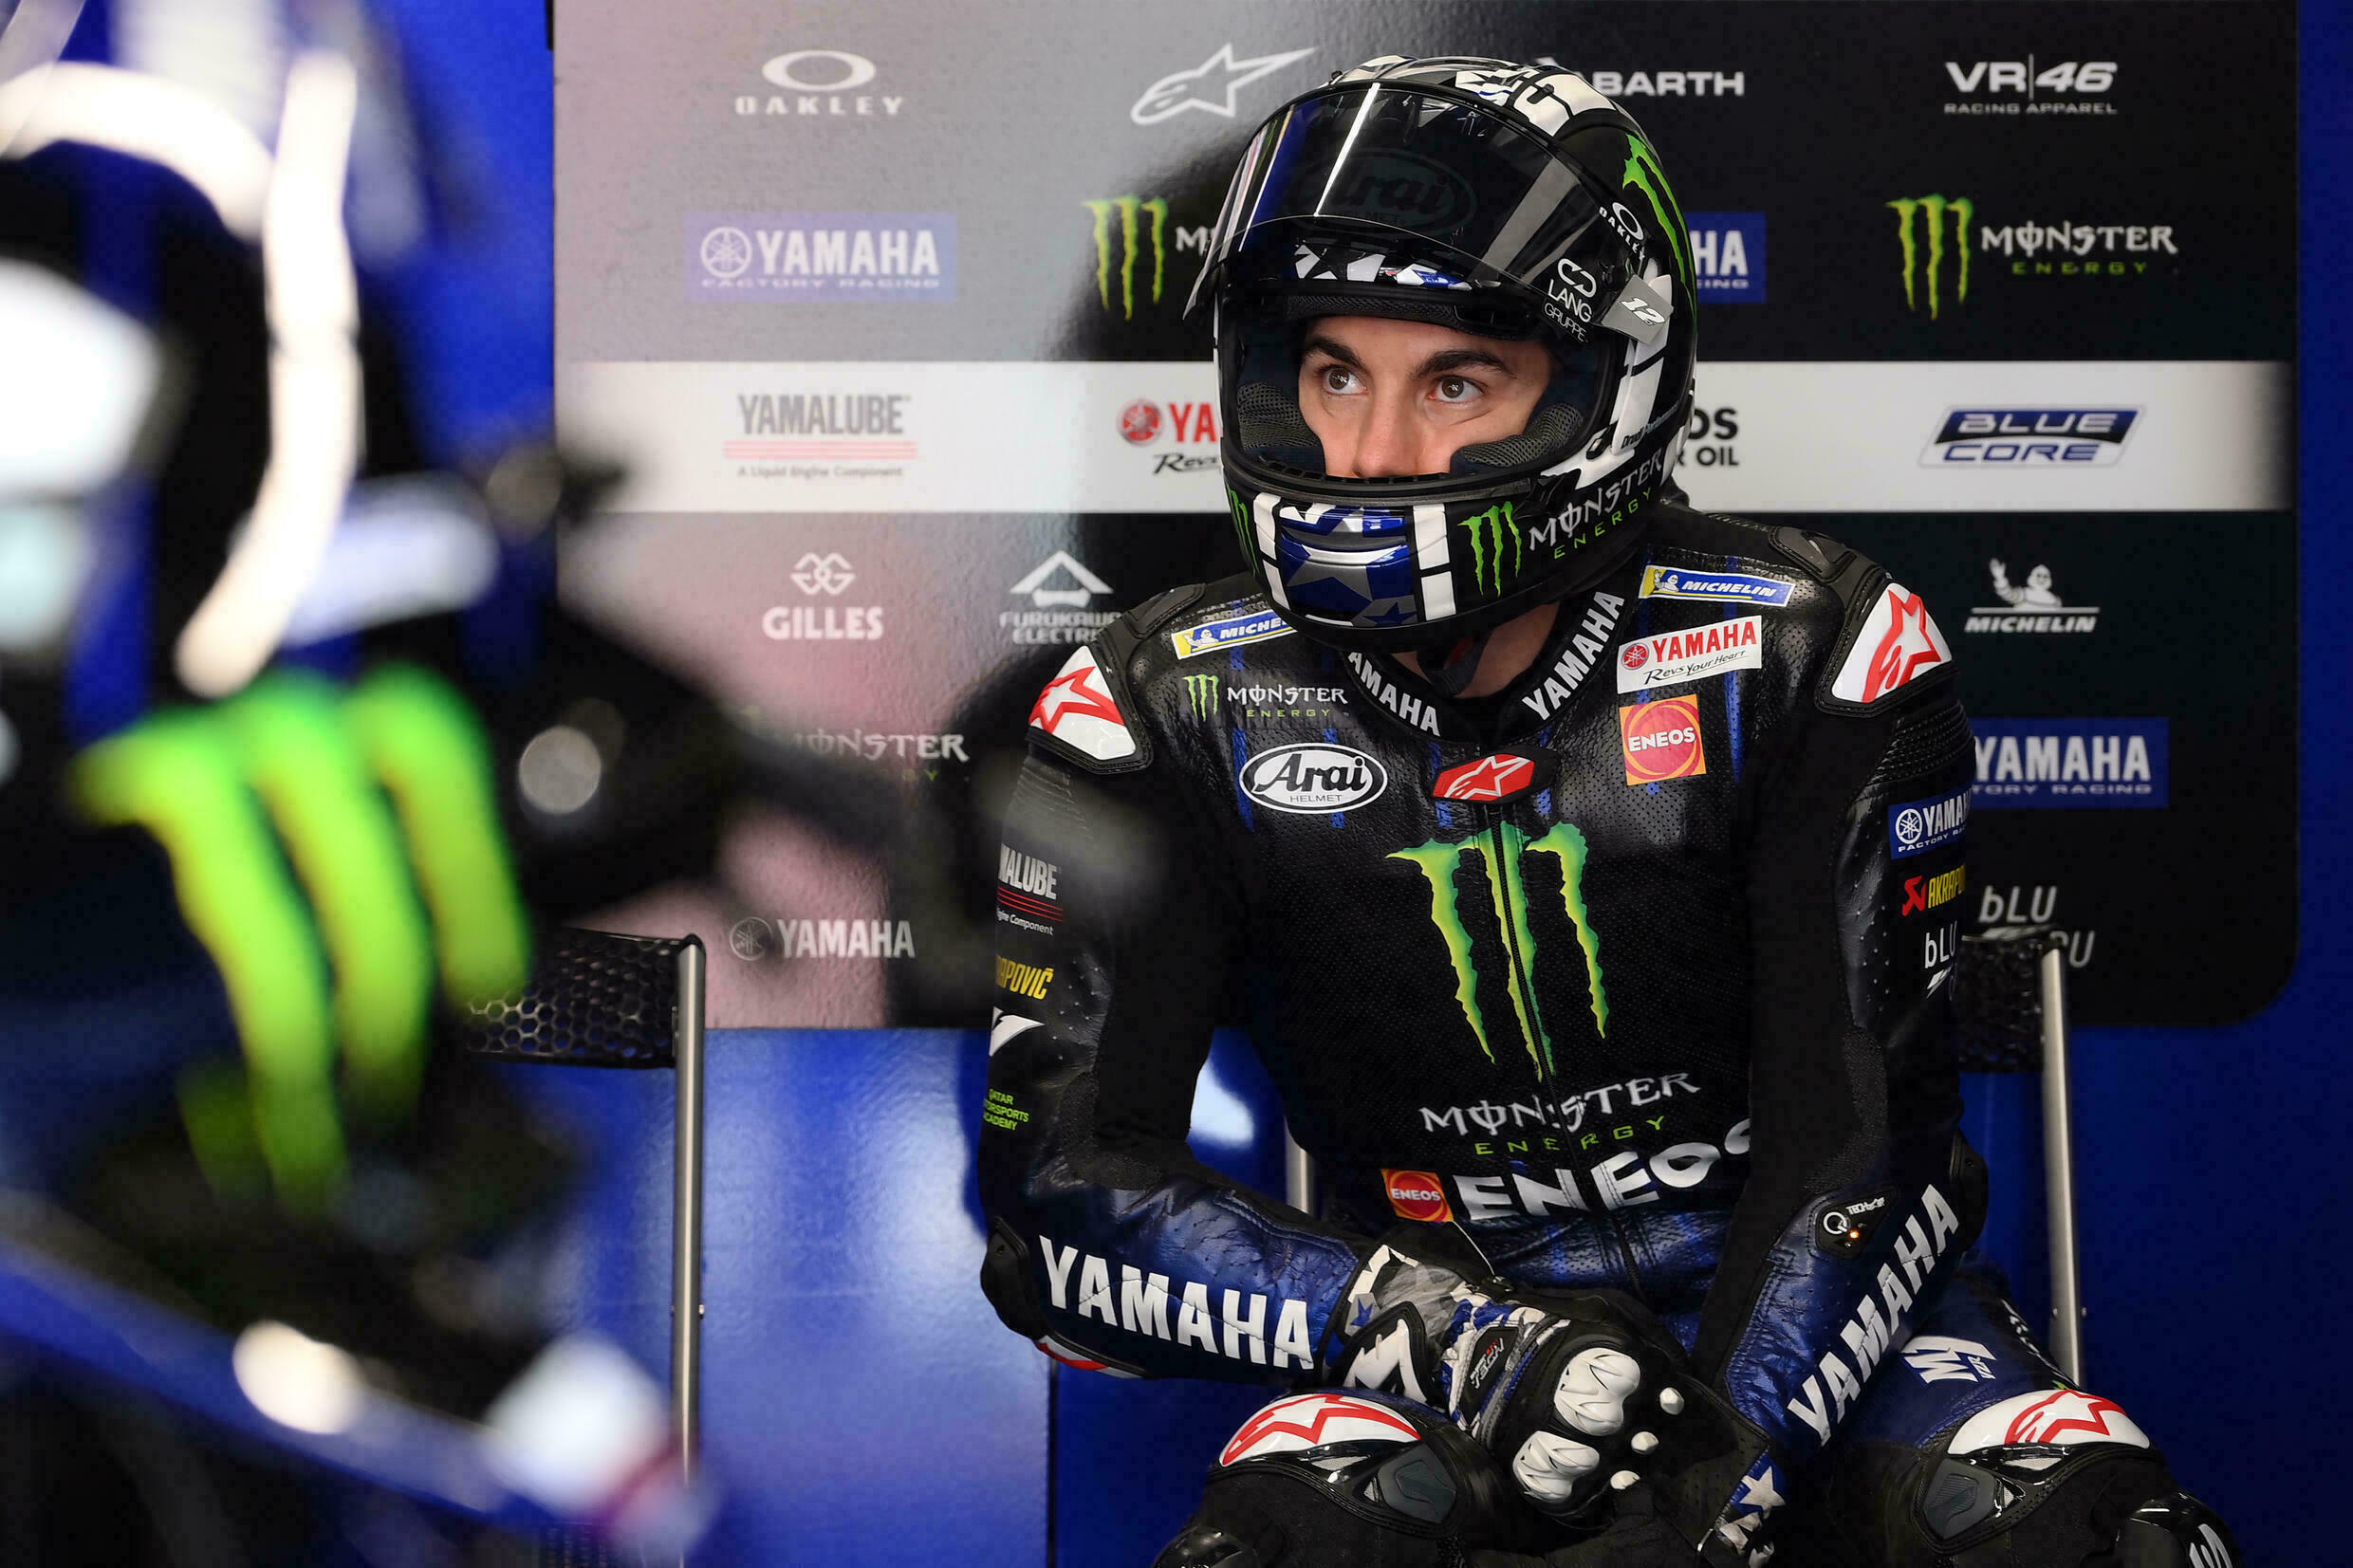 Speculation Vinales and Yamaha may be parting ways even before end of the season